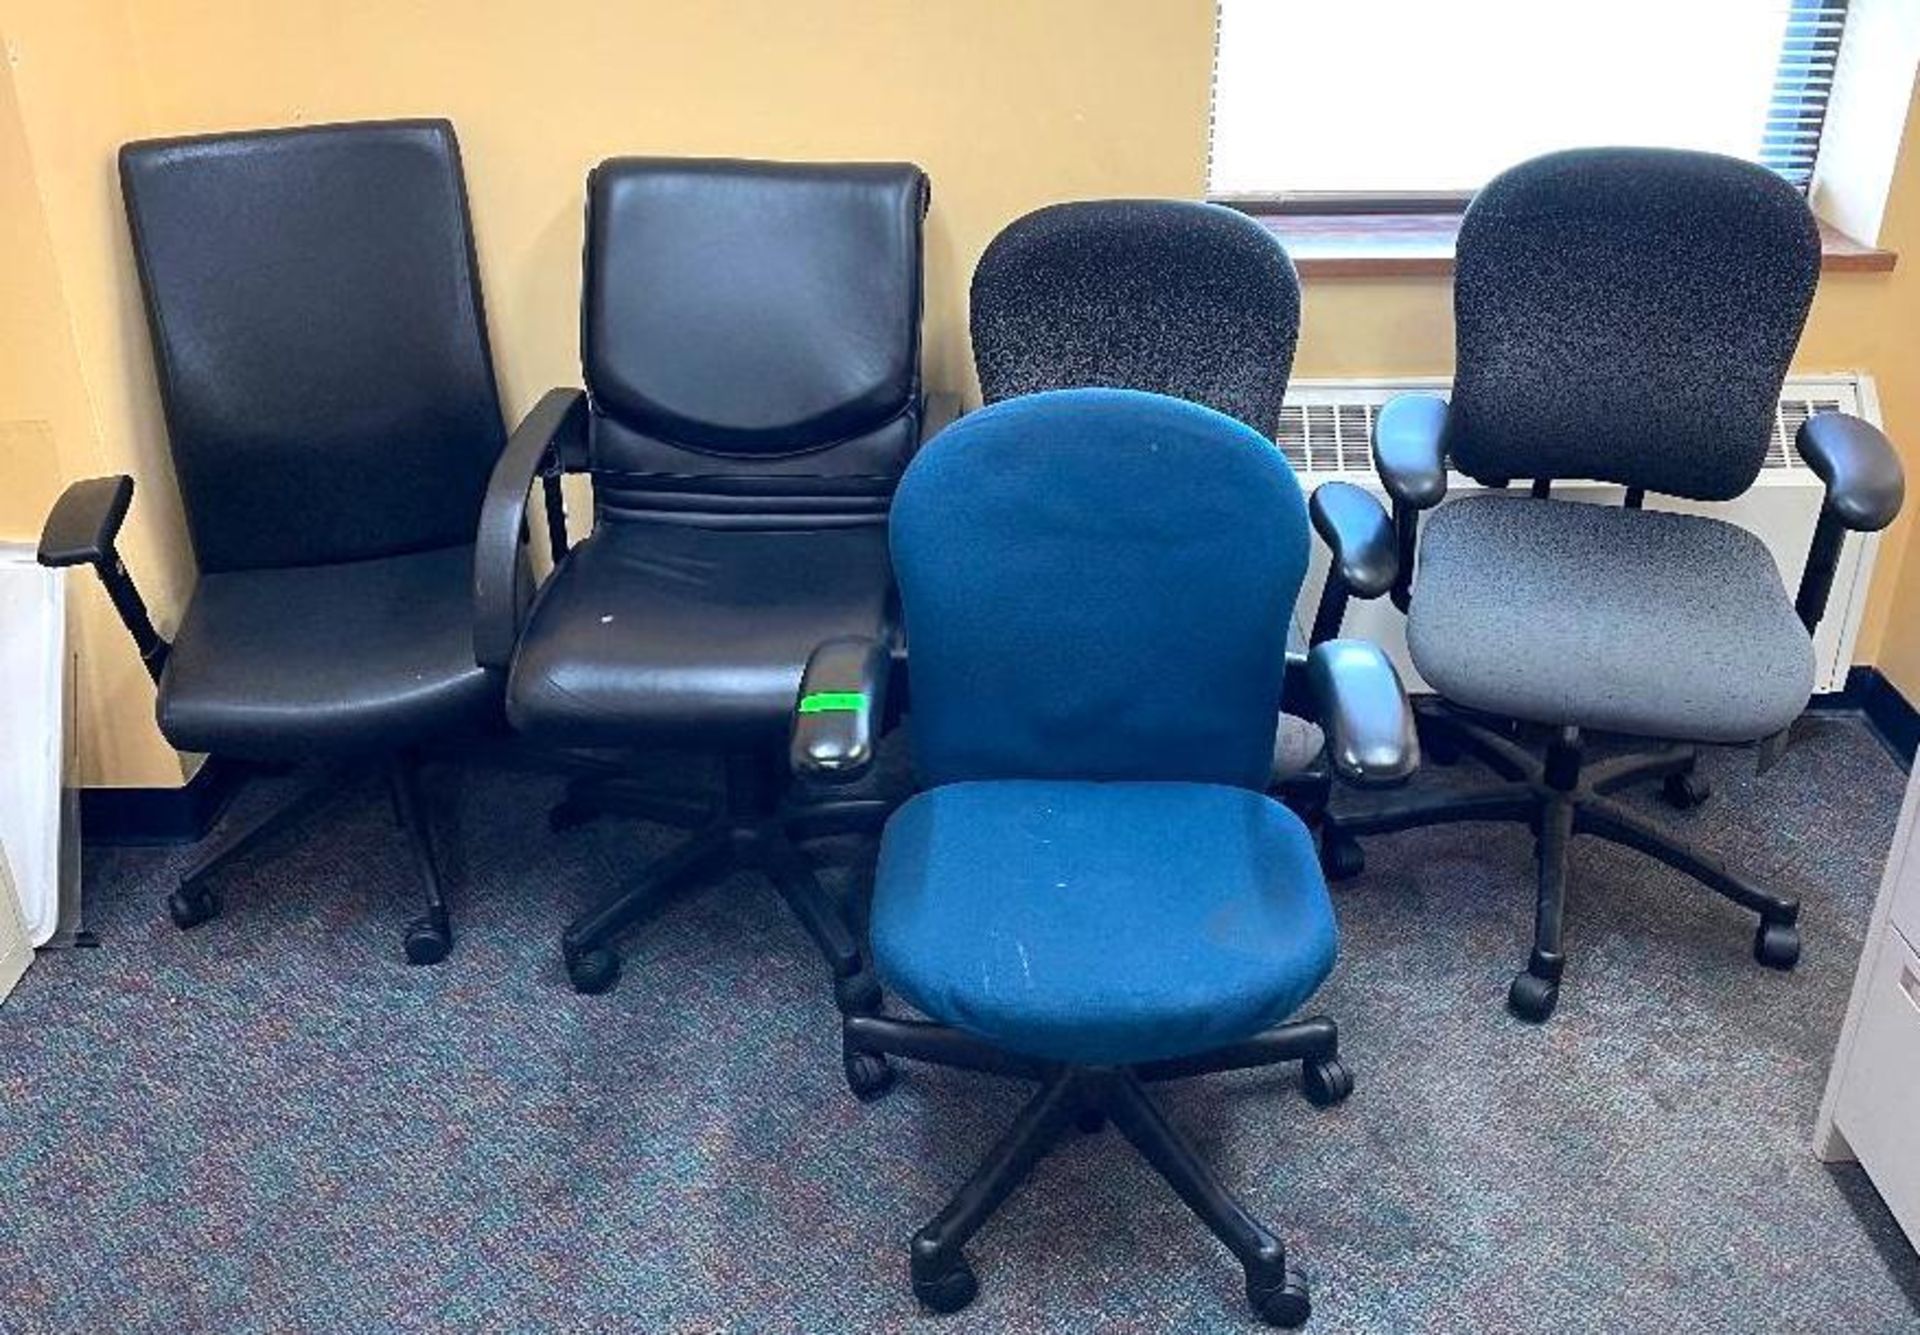 DESCRIPTION ASSORTED OFFICE CHAIRS AS SHOWN LOCATION 540 THIS LOT IS ONE MONEY QUANTITY 1